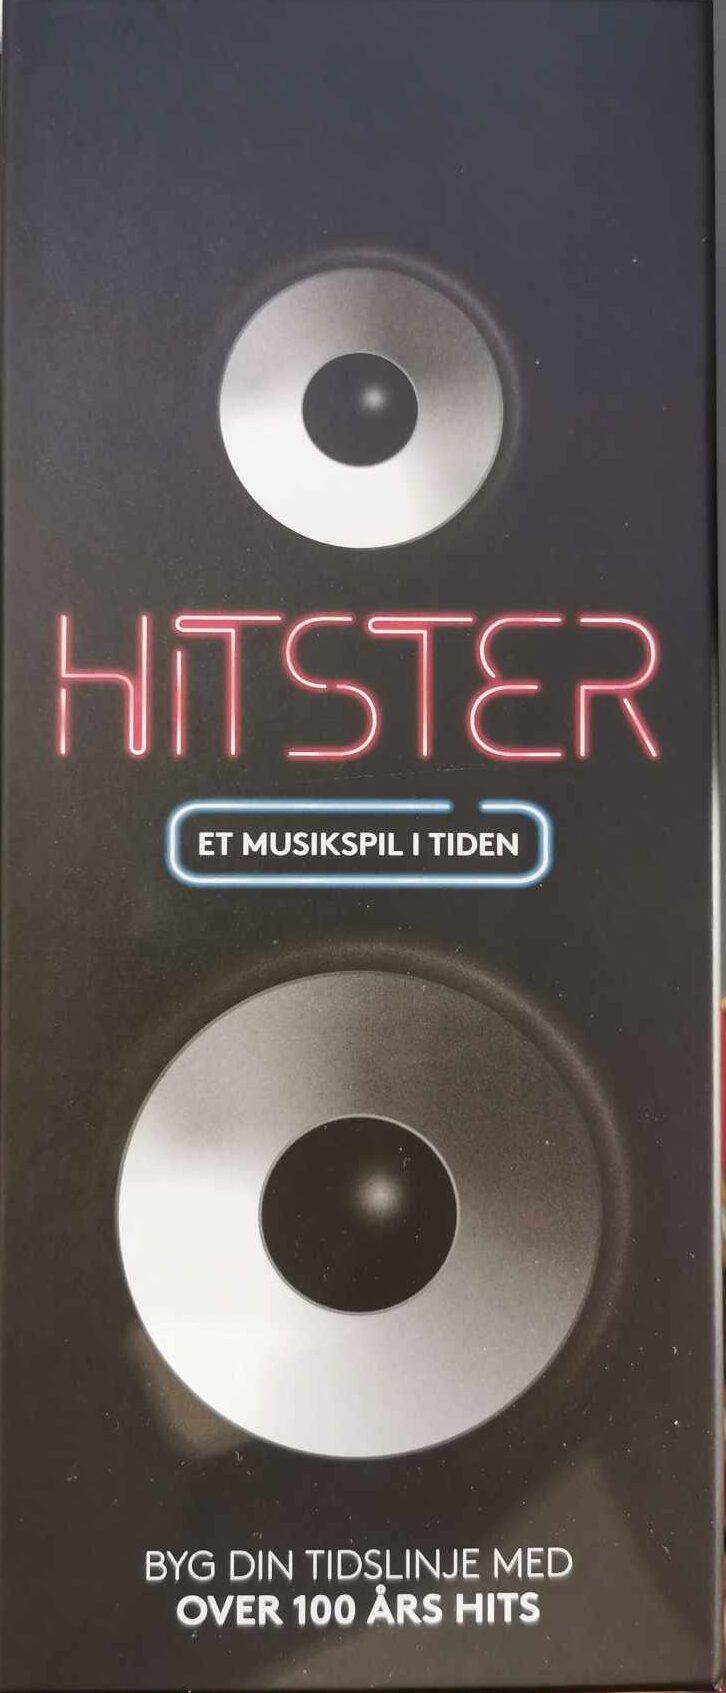 Read more about the article Hitster